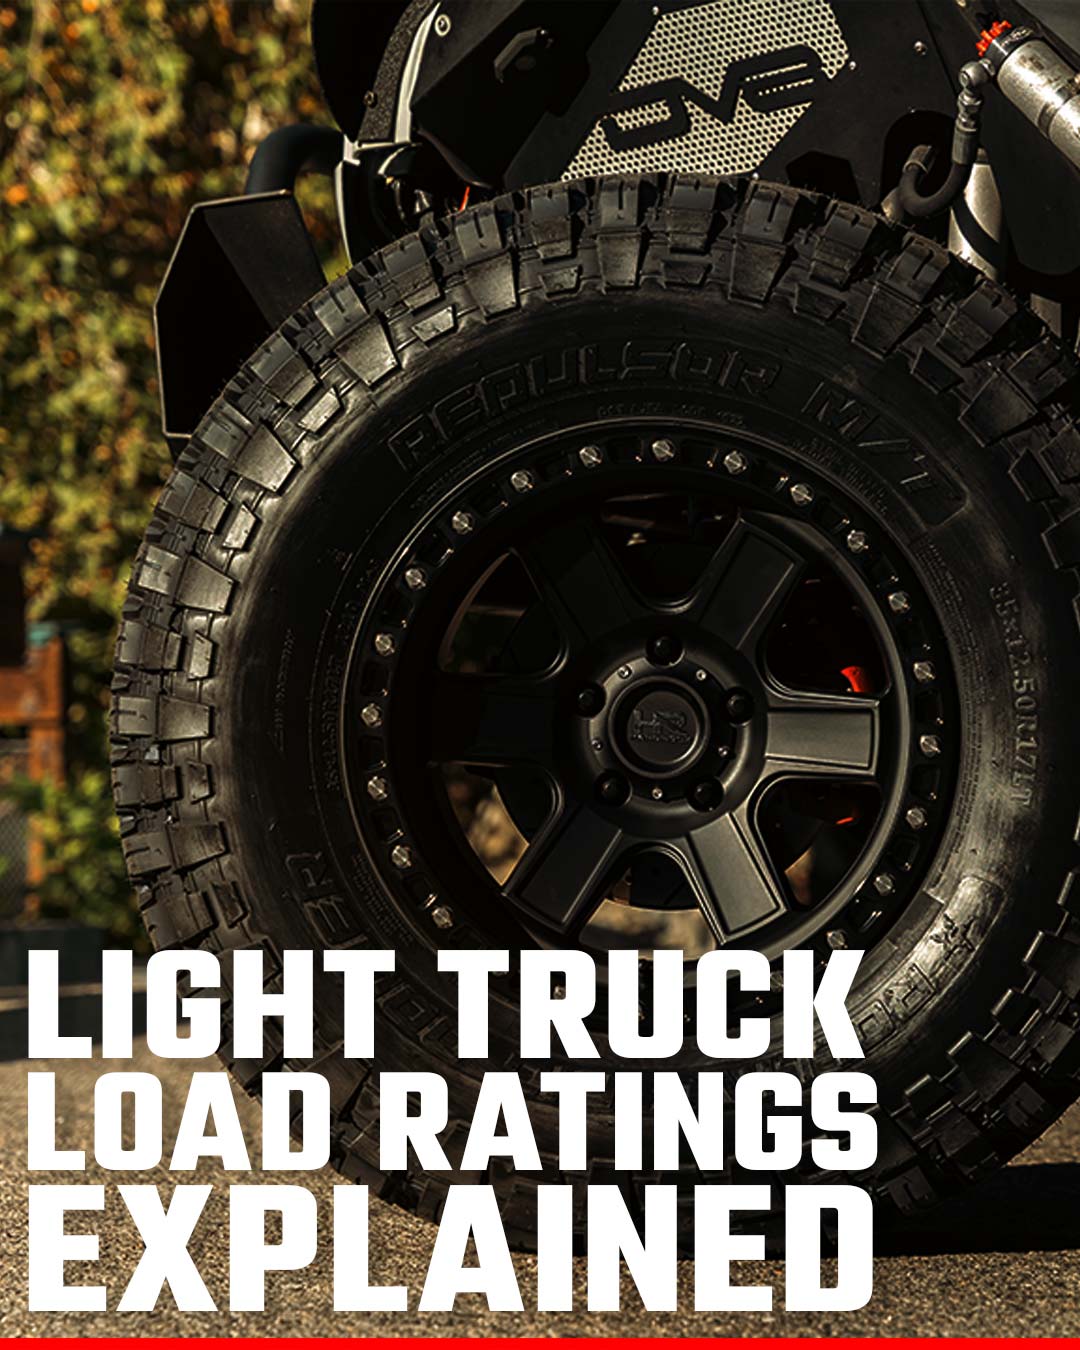 light truck load ratings featured image